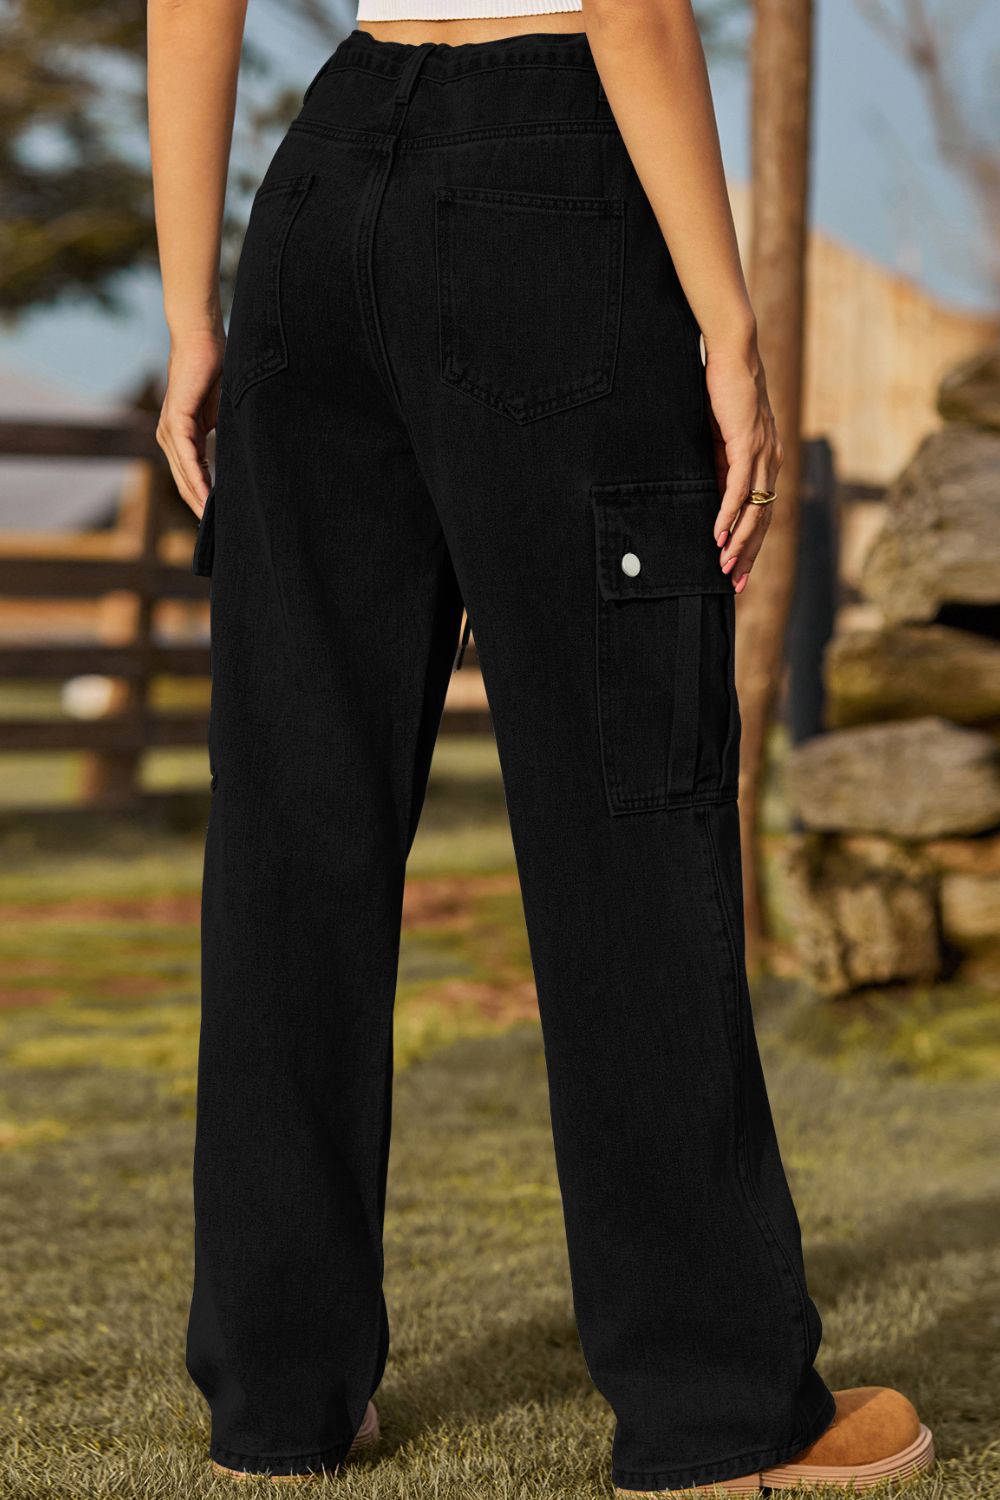 Black Loose Fit Drawstring Jeans with Pocket Sentient Beauty Fashions Apparel &amp; Accessories